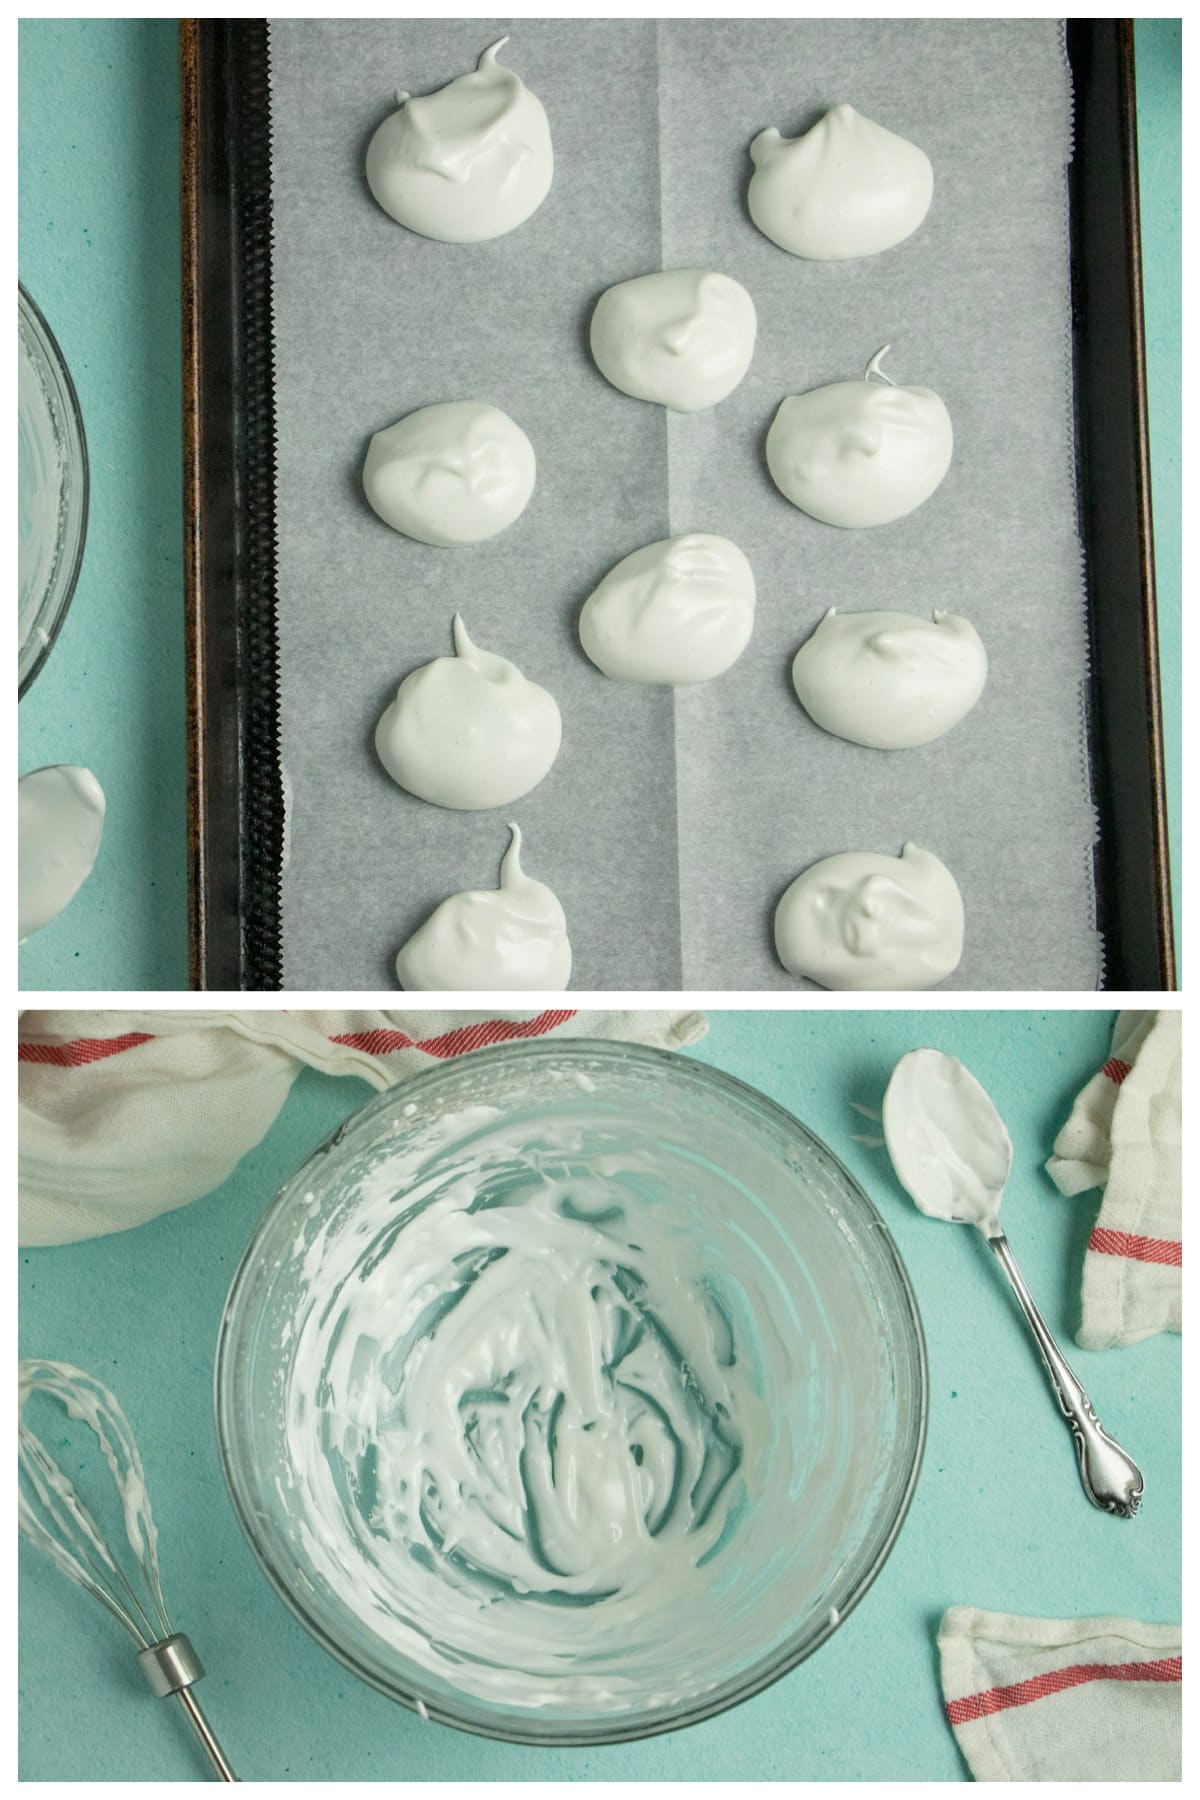 image collage showing unbaked meringues on a lined baking sheet and the messy bowl after spooning out all of the batter